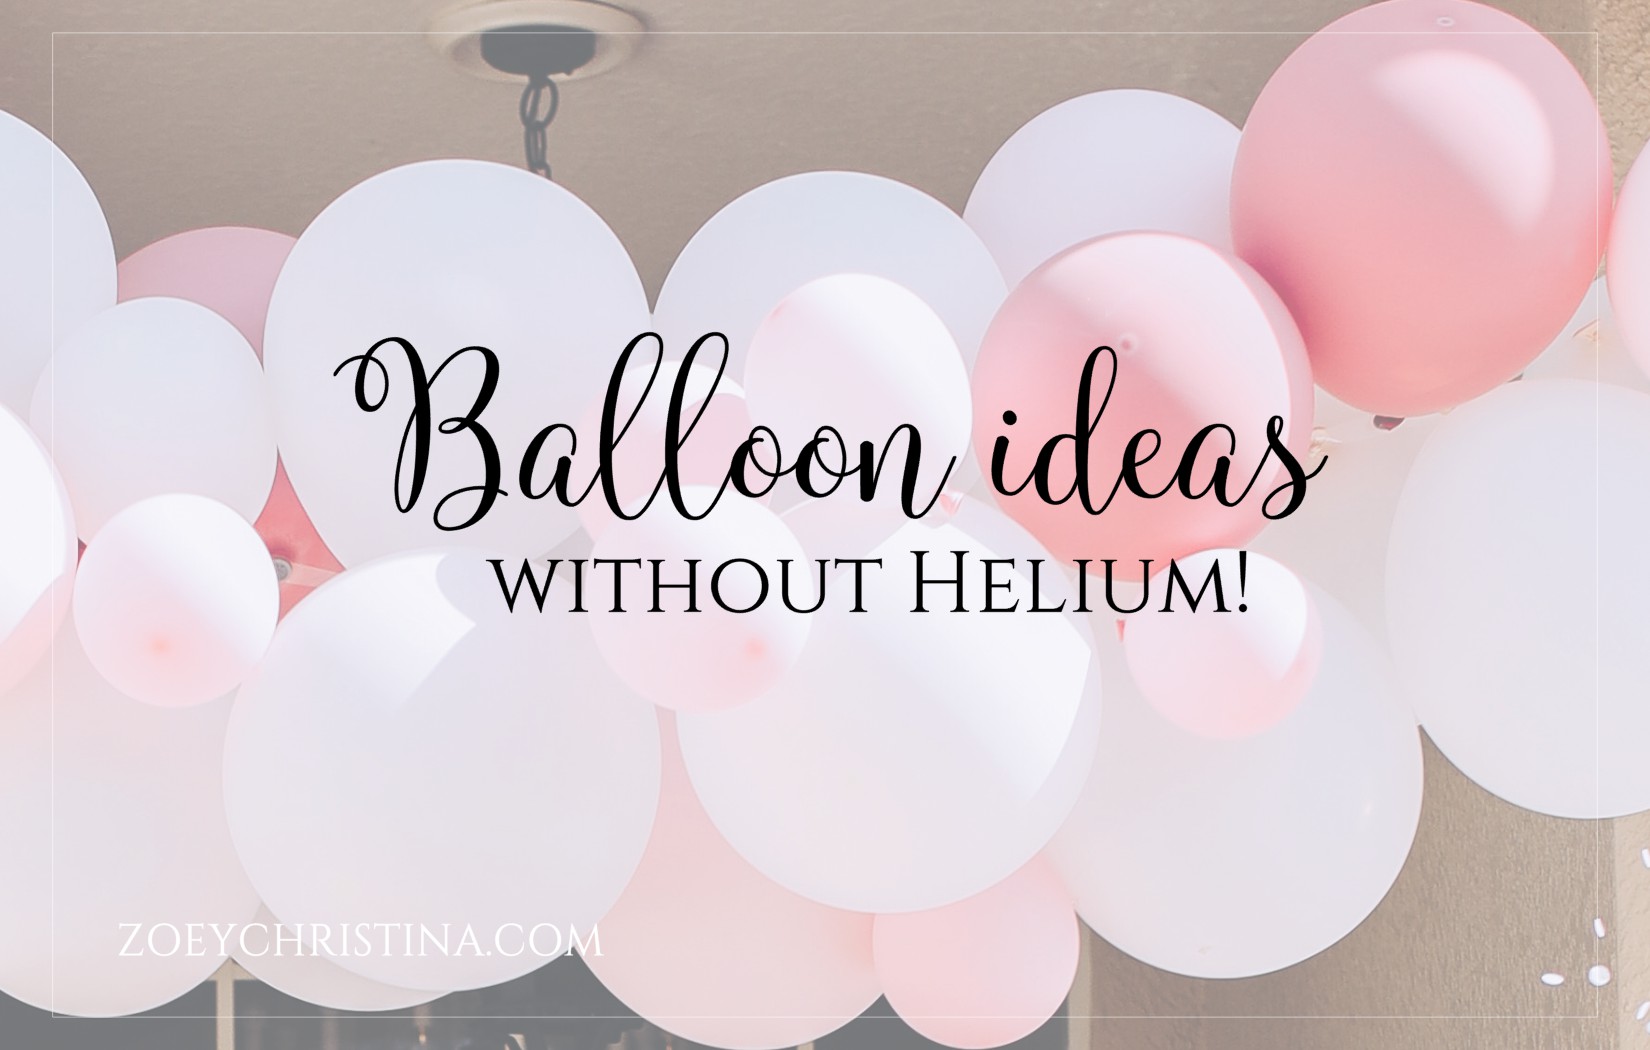 How to use balloons without helium